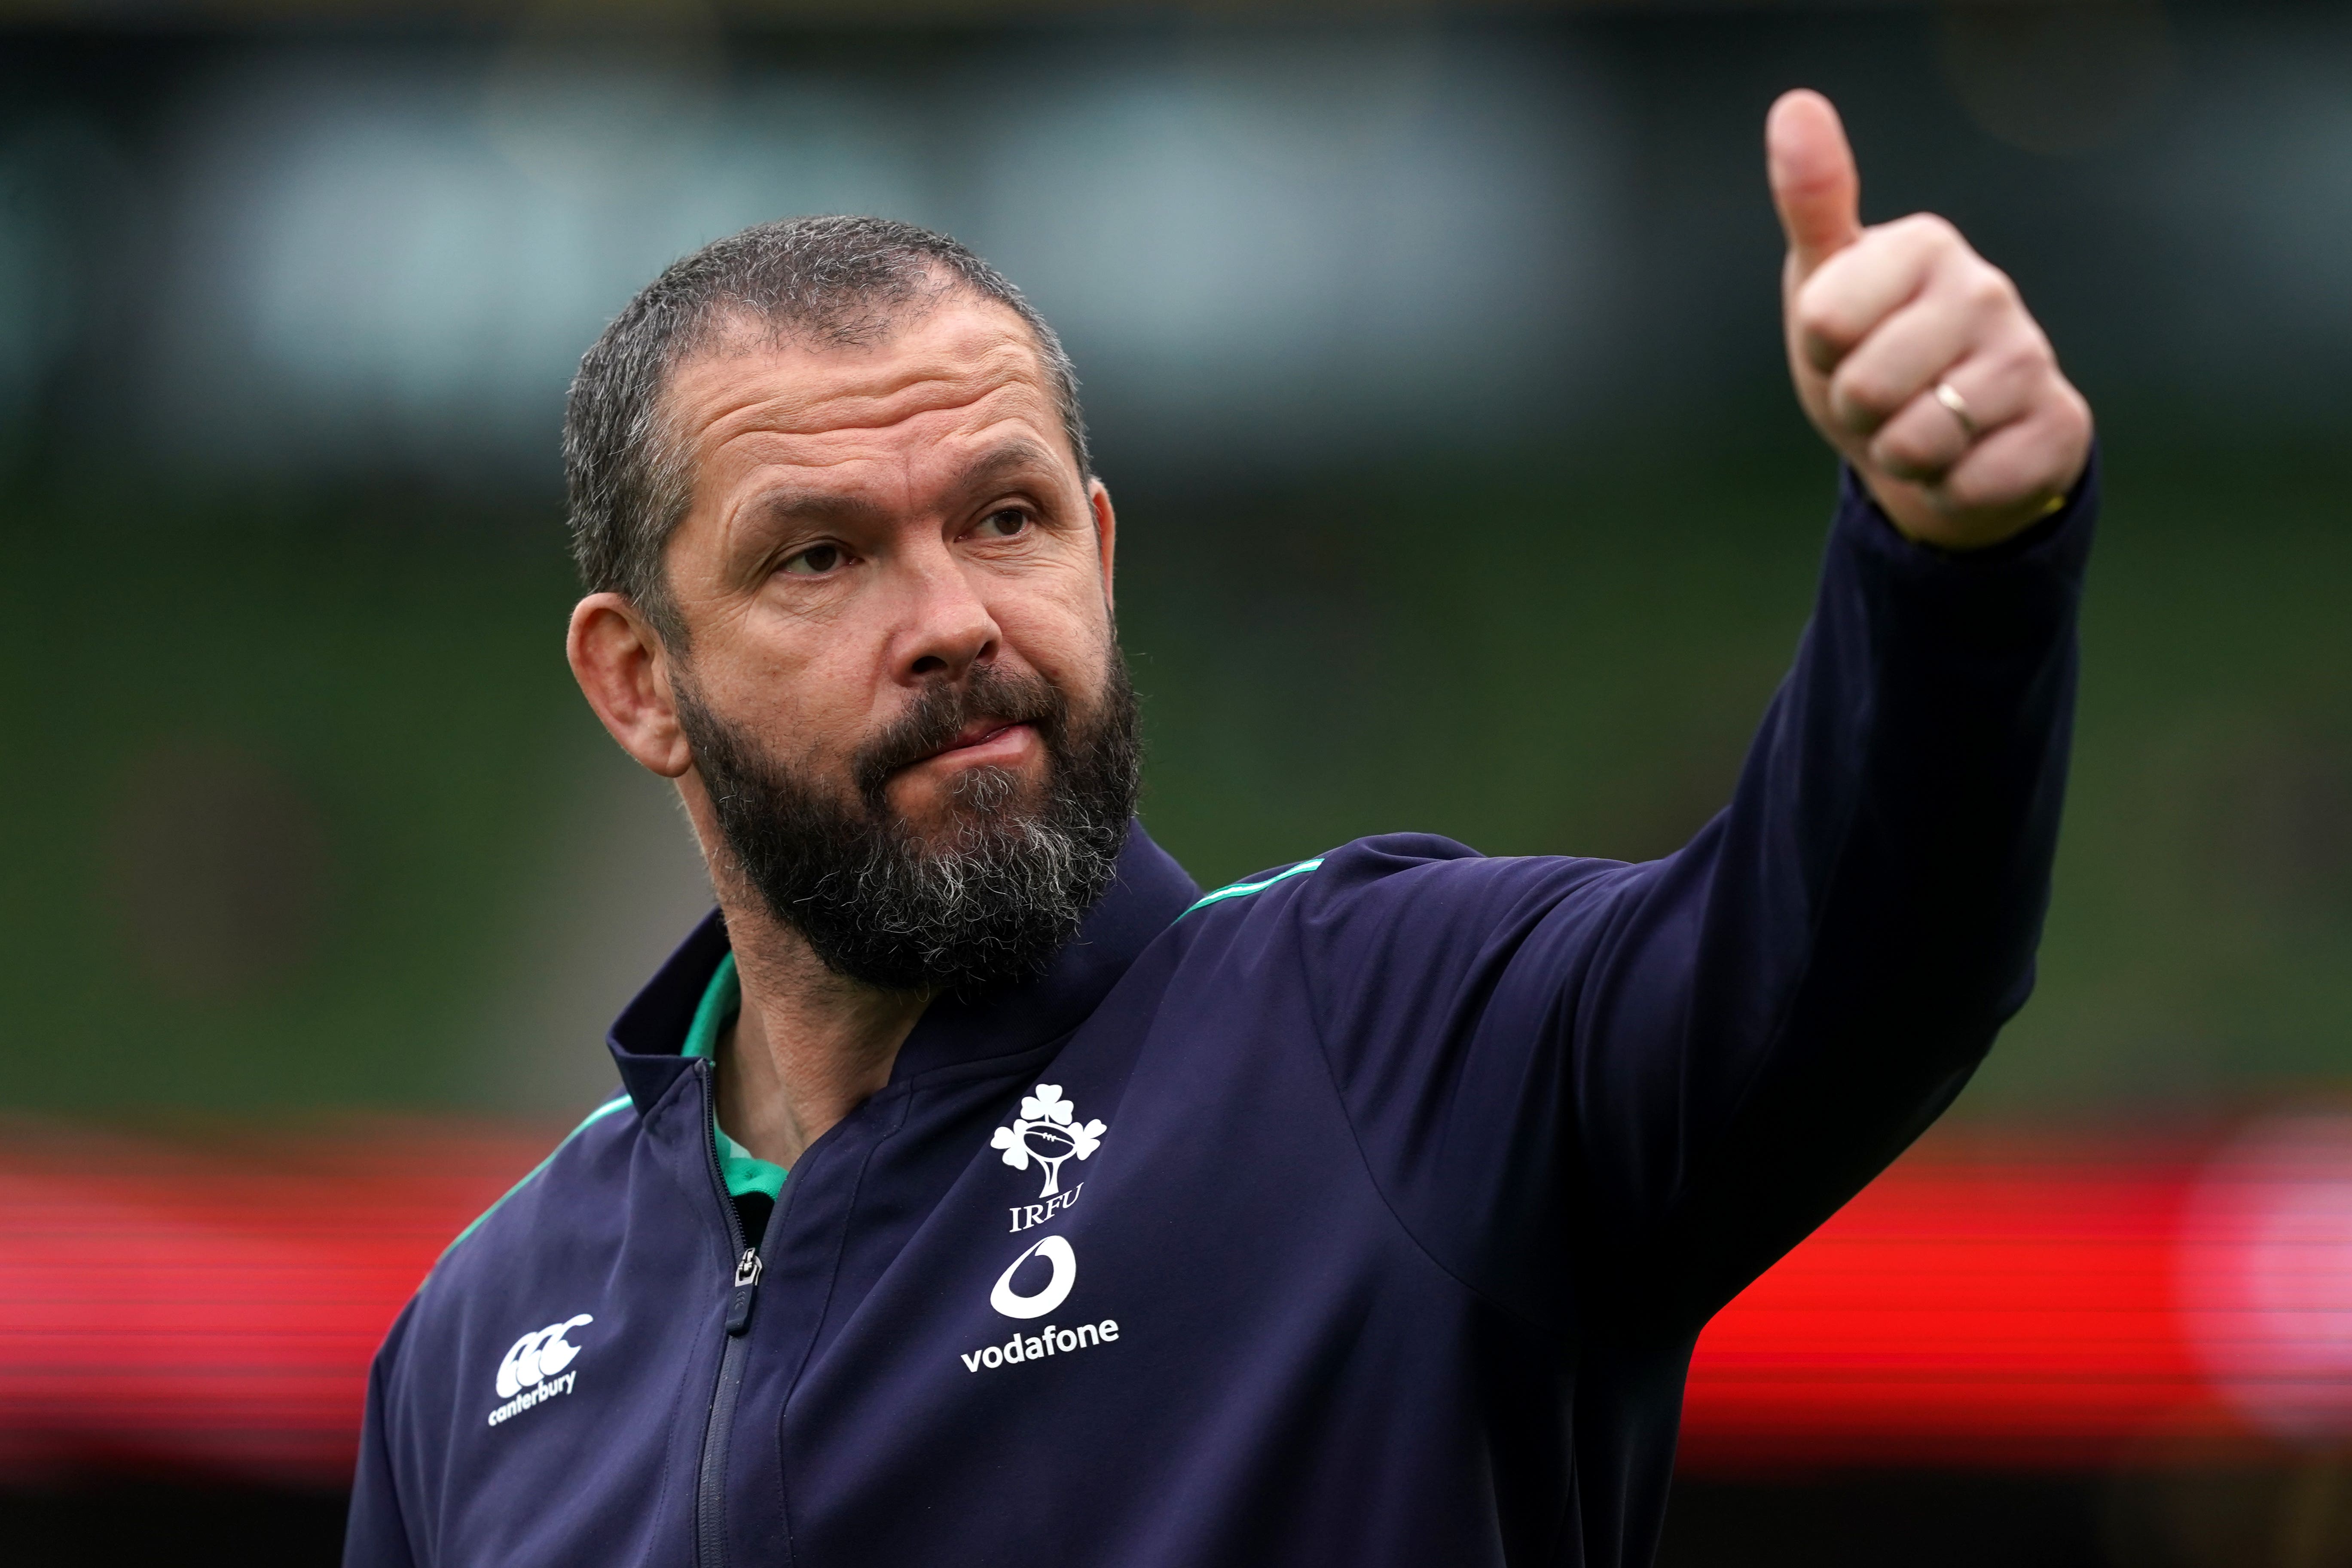 Ireland head coach Andy Farrell saw his side open their Six Nations title defence with a convincing win over France (Brian Lawless/PA)